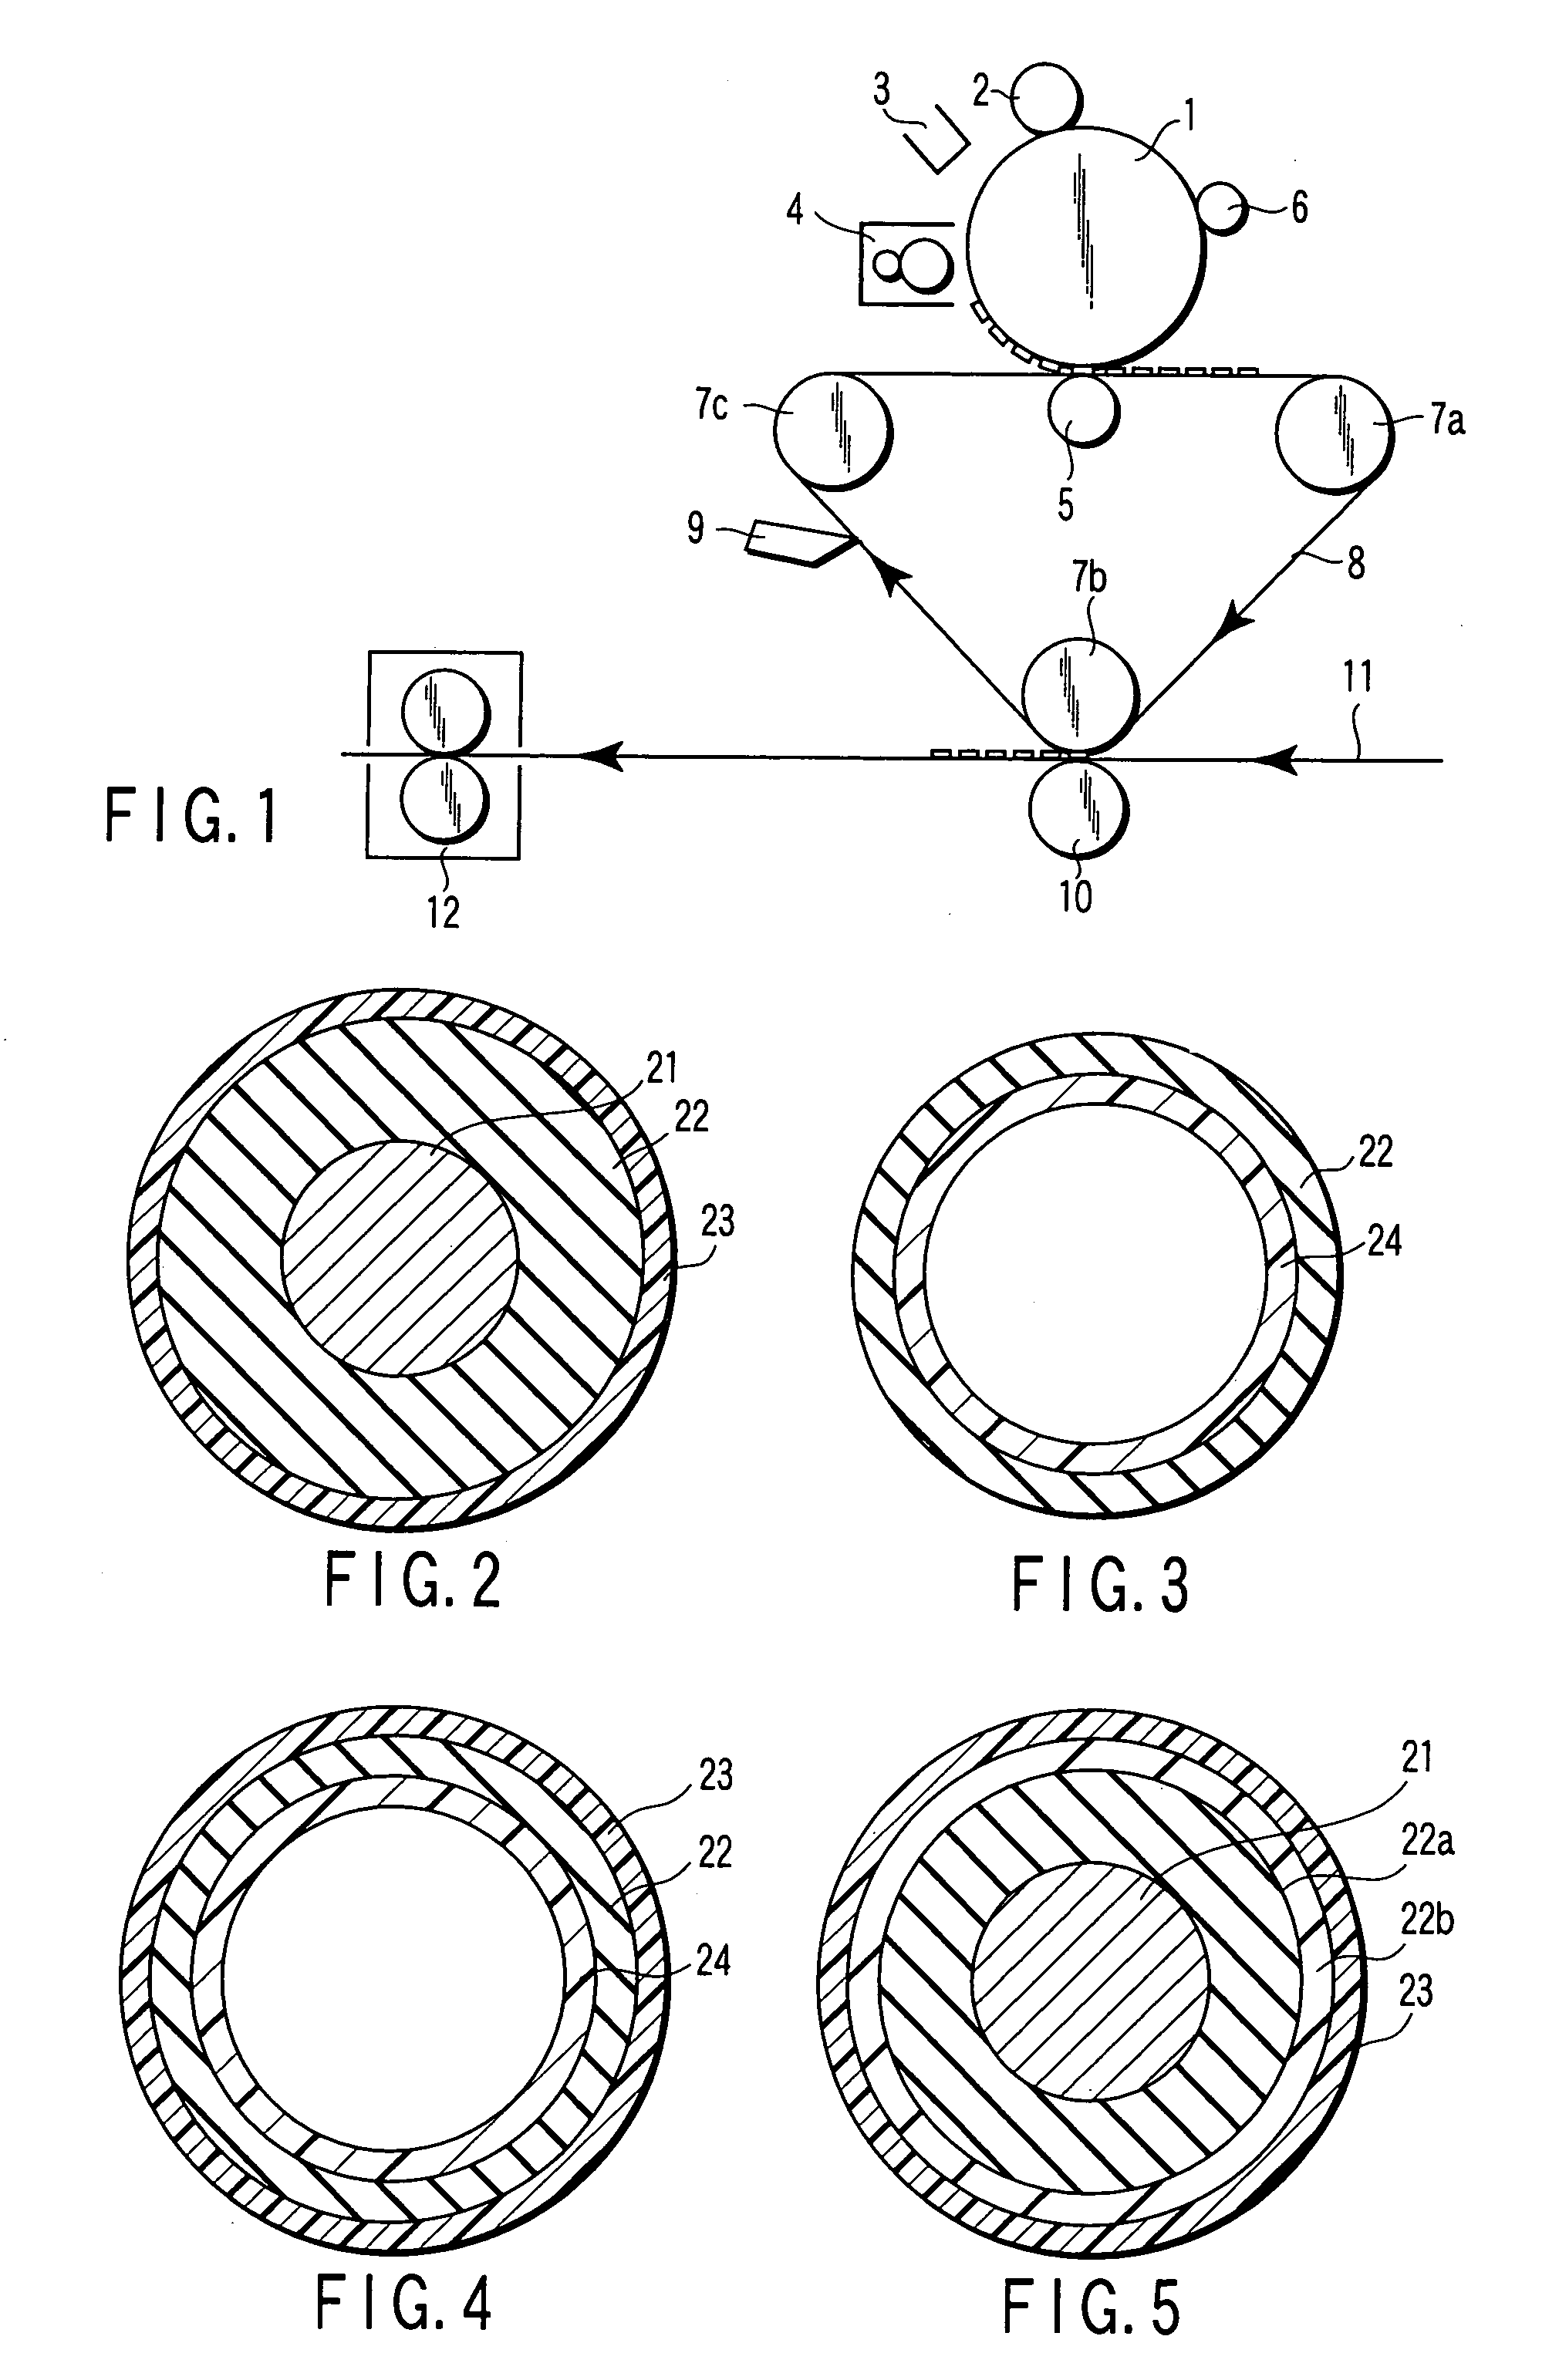 Electrically conductive member